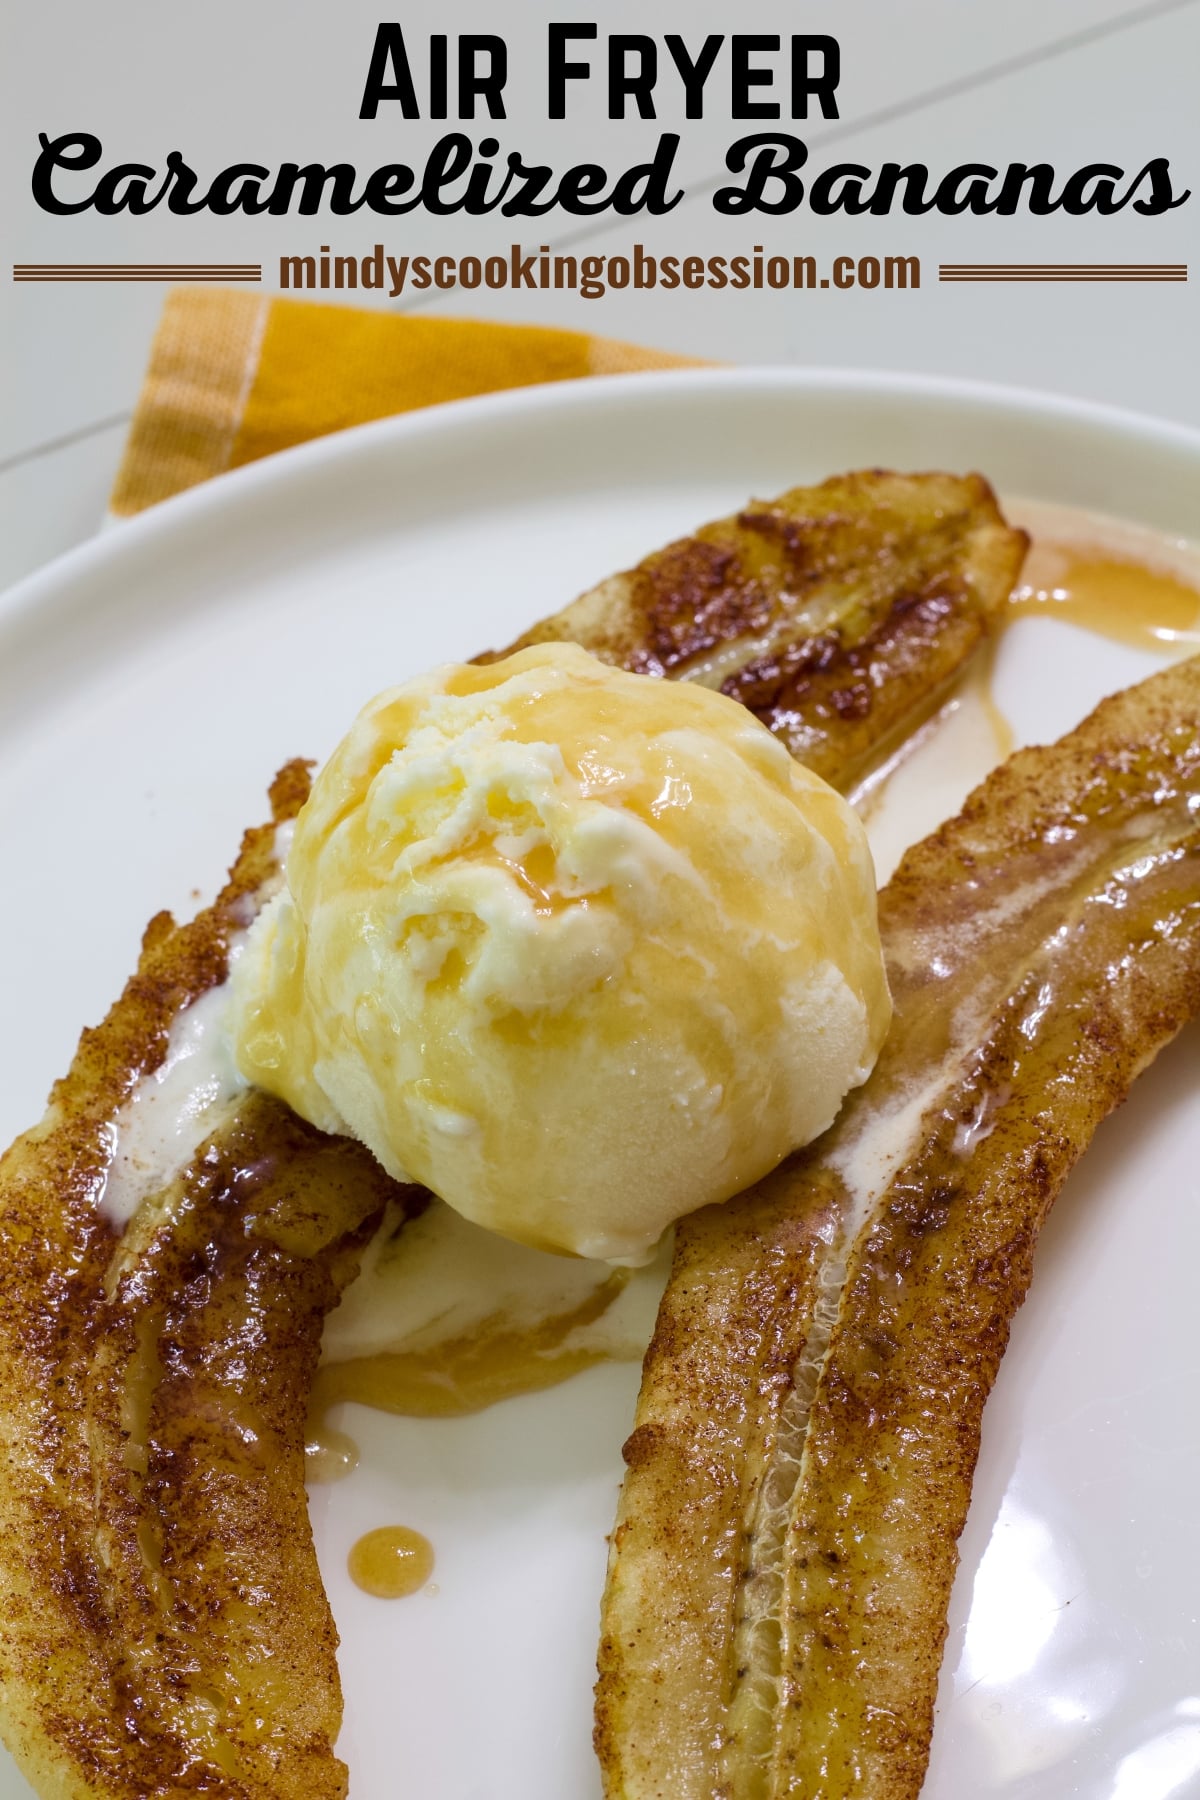 Air Fryer Caramelized Fried Bananas Recipe (2 ways) uses simple ingredients and are great with ice cream, oatmeal, pancakes or French toast.  via @mindyscookingobsession